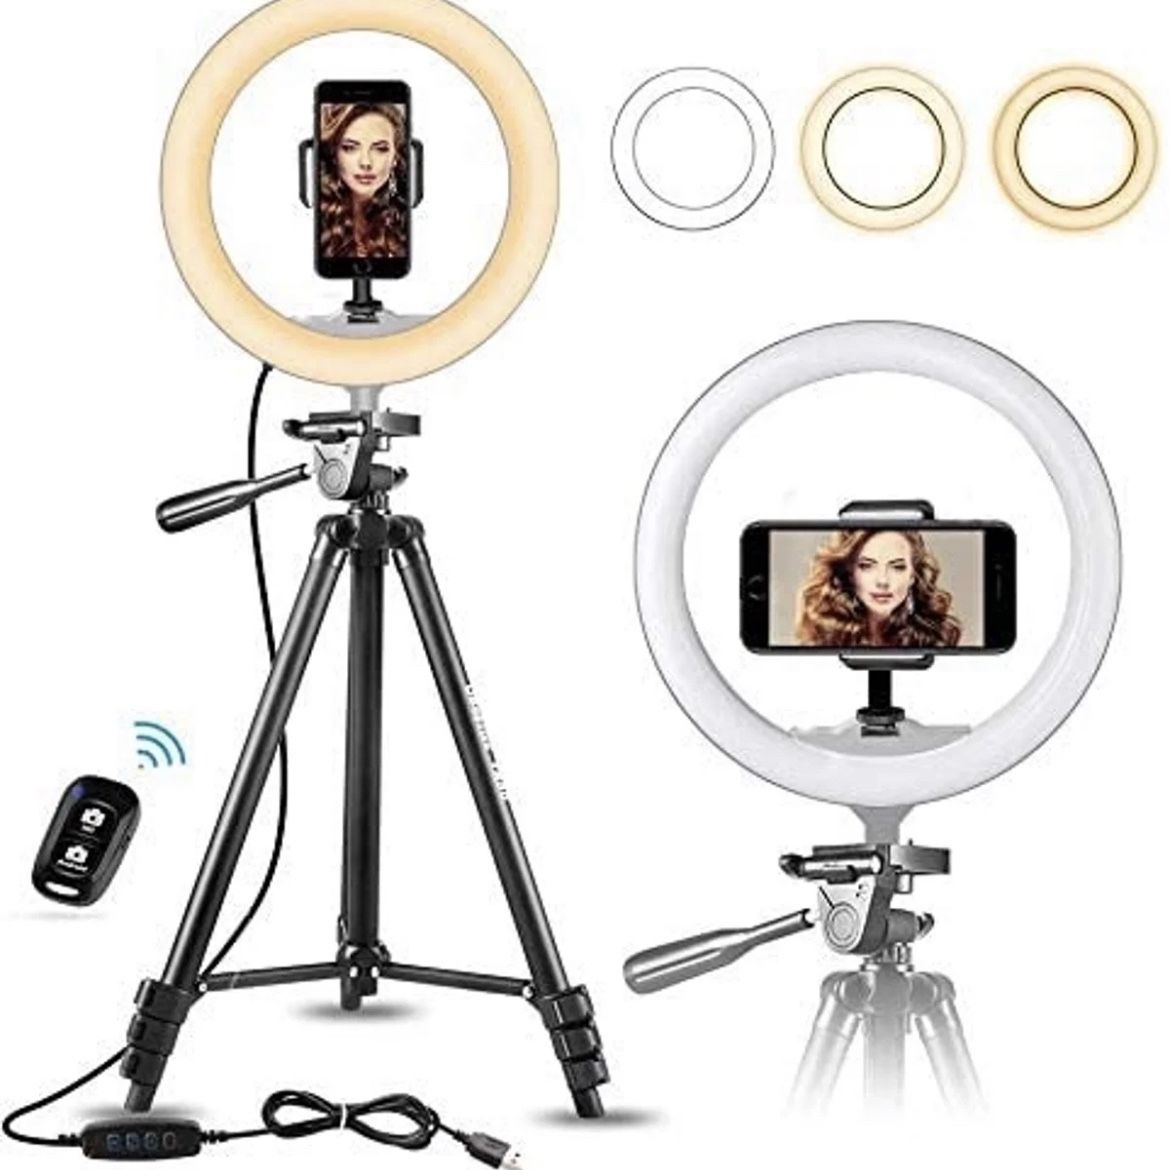 10" Selfie Ring Light with 50" Extendable Tripod Stand